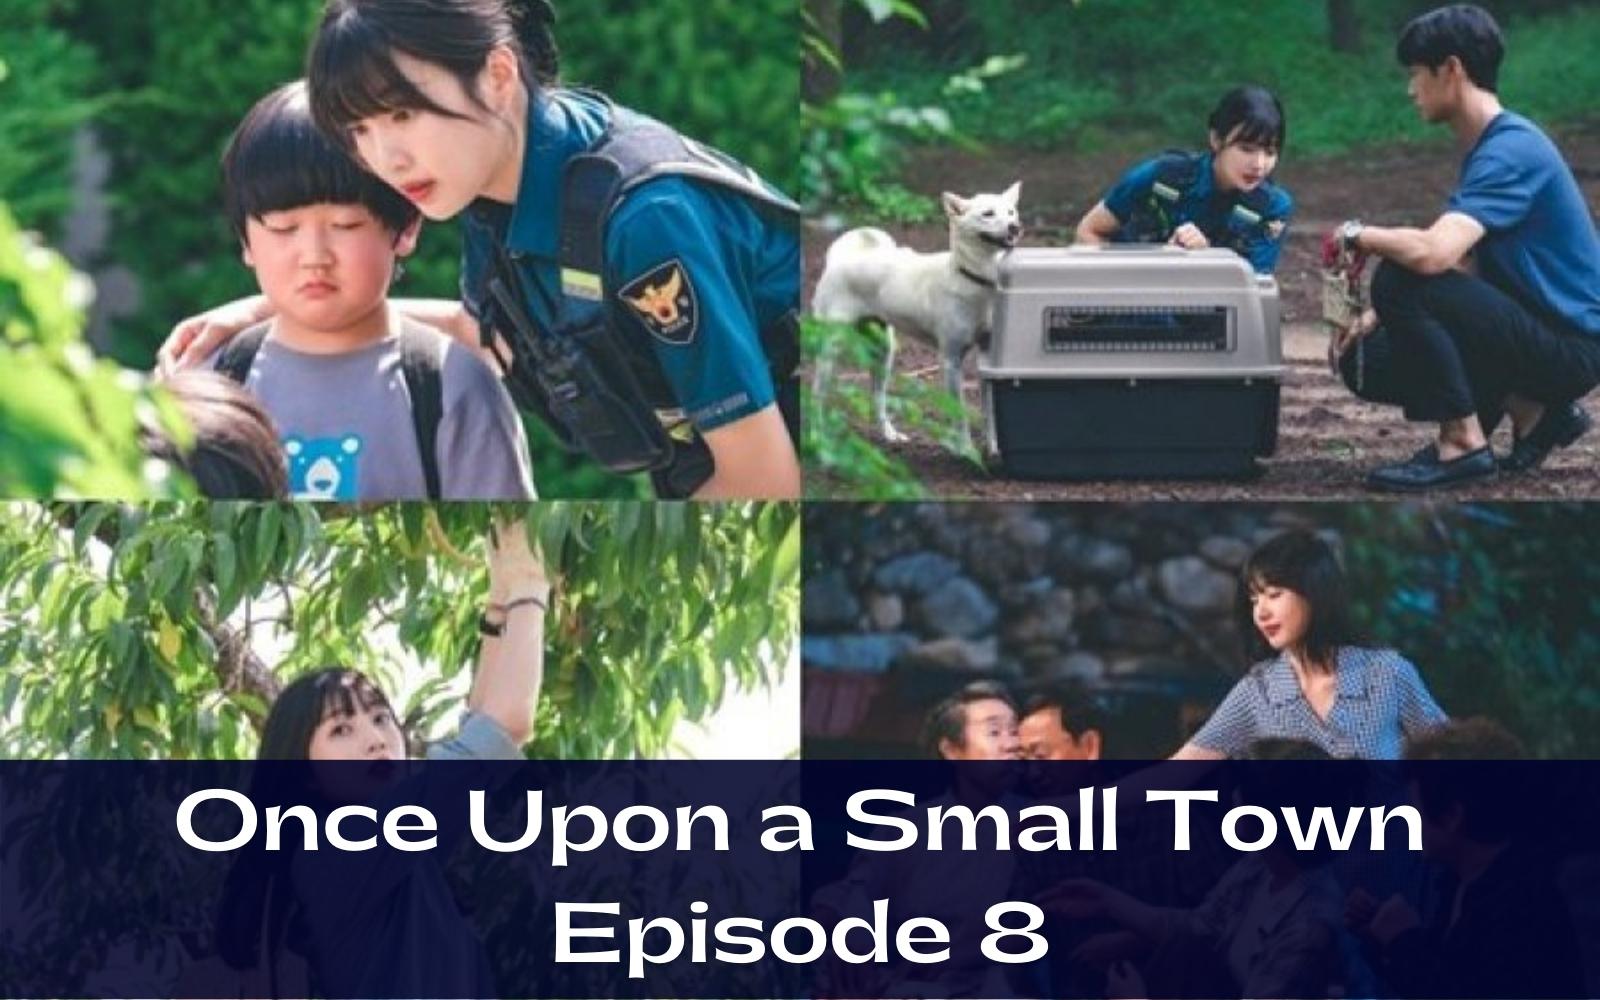 Once Upon a Small Town Episode 8 : Countdown, Release Date, Spoiler, Recap, Review & Where to Watch